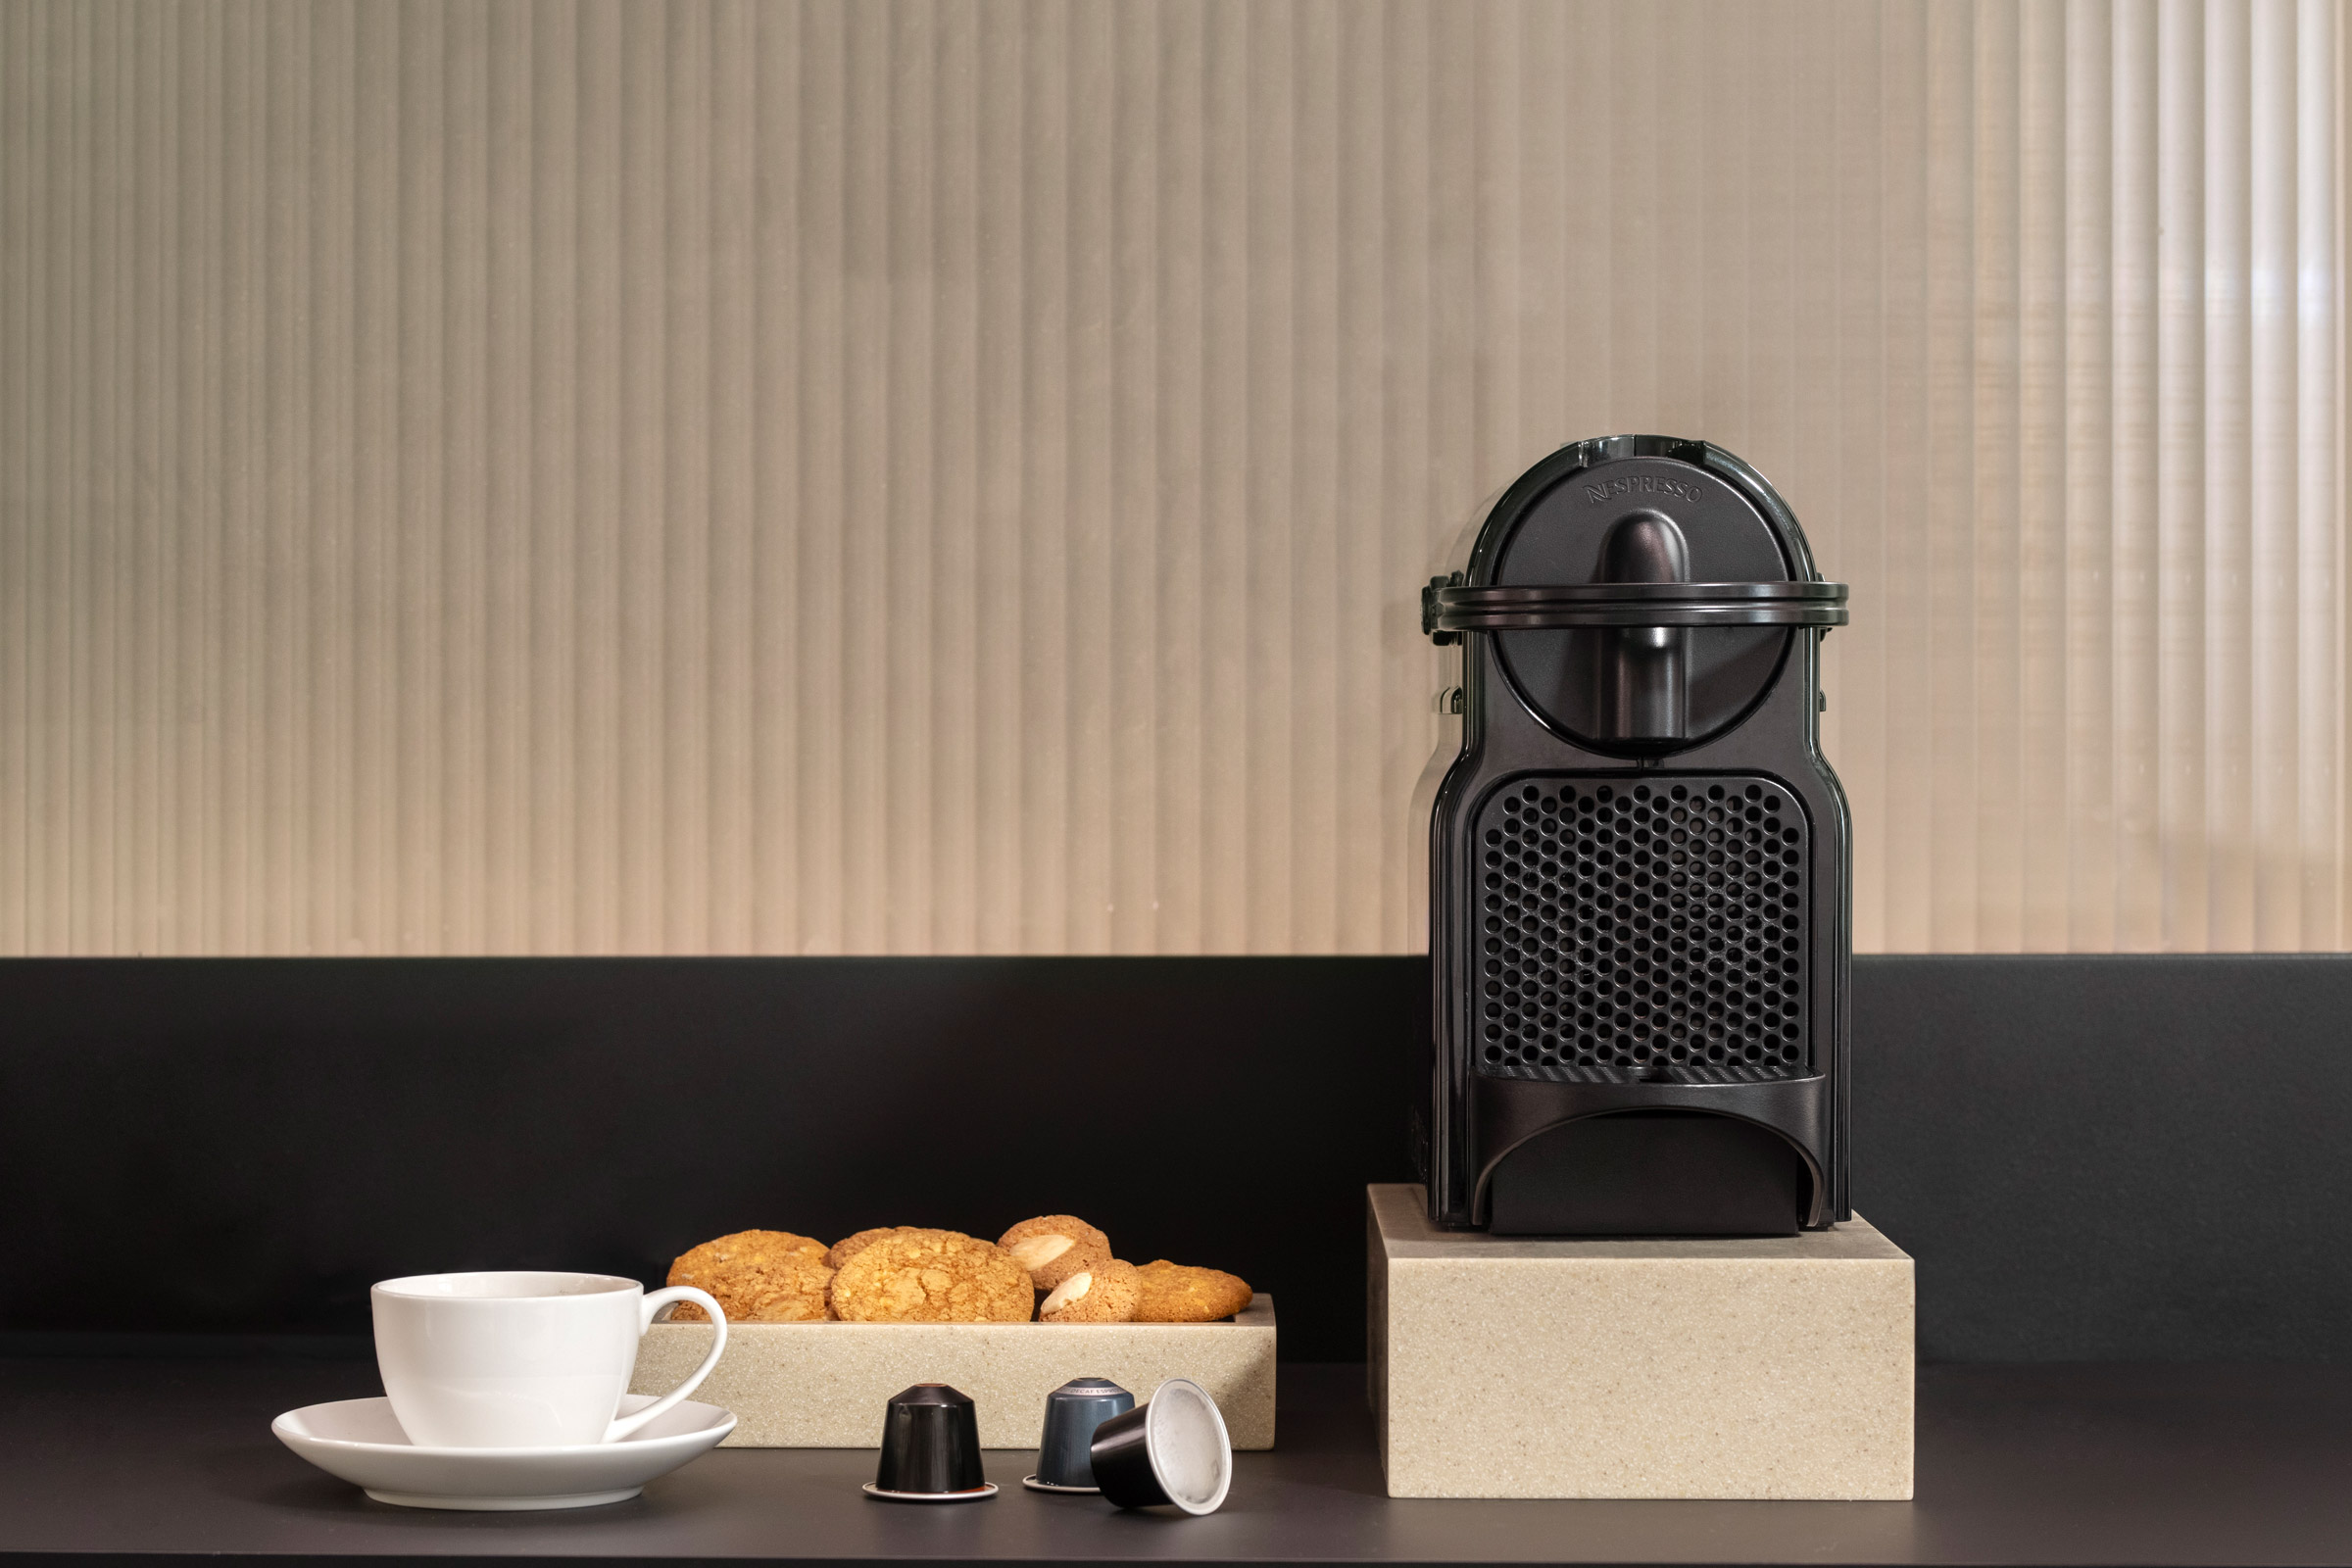 Coffee and pastries to share in your suite